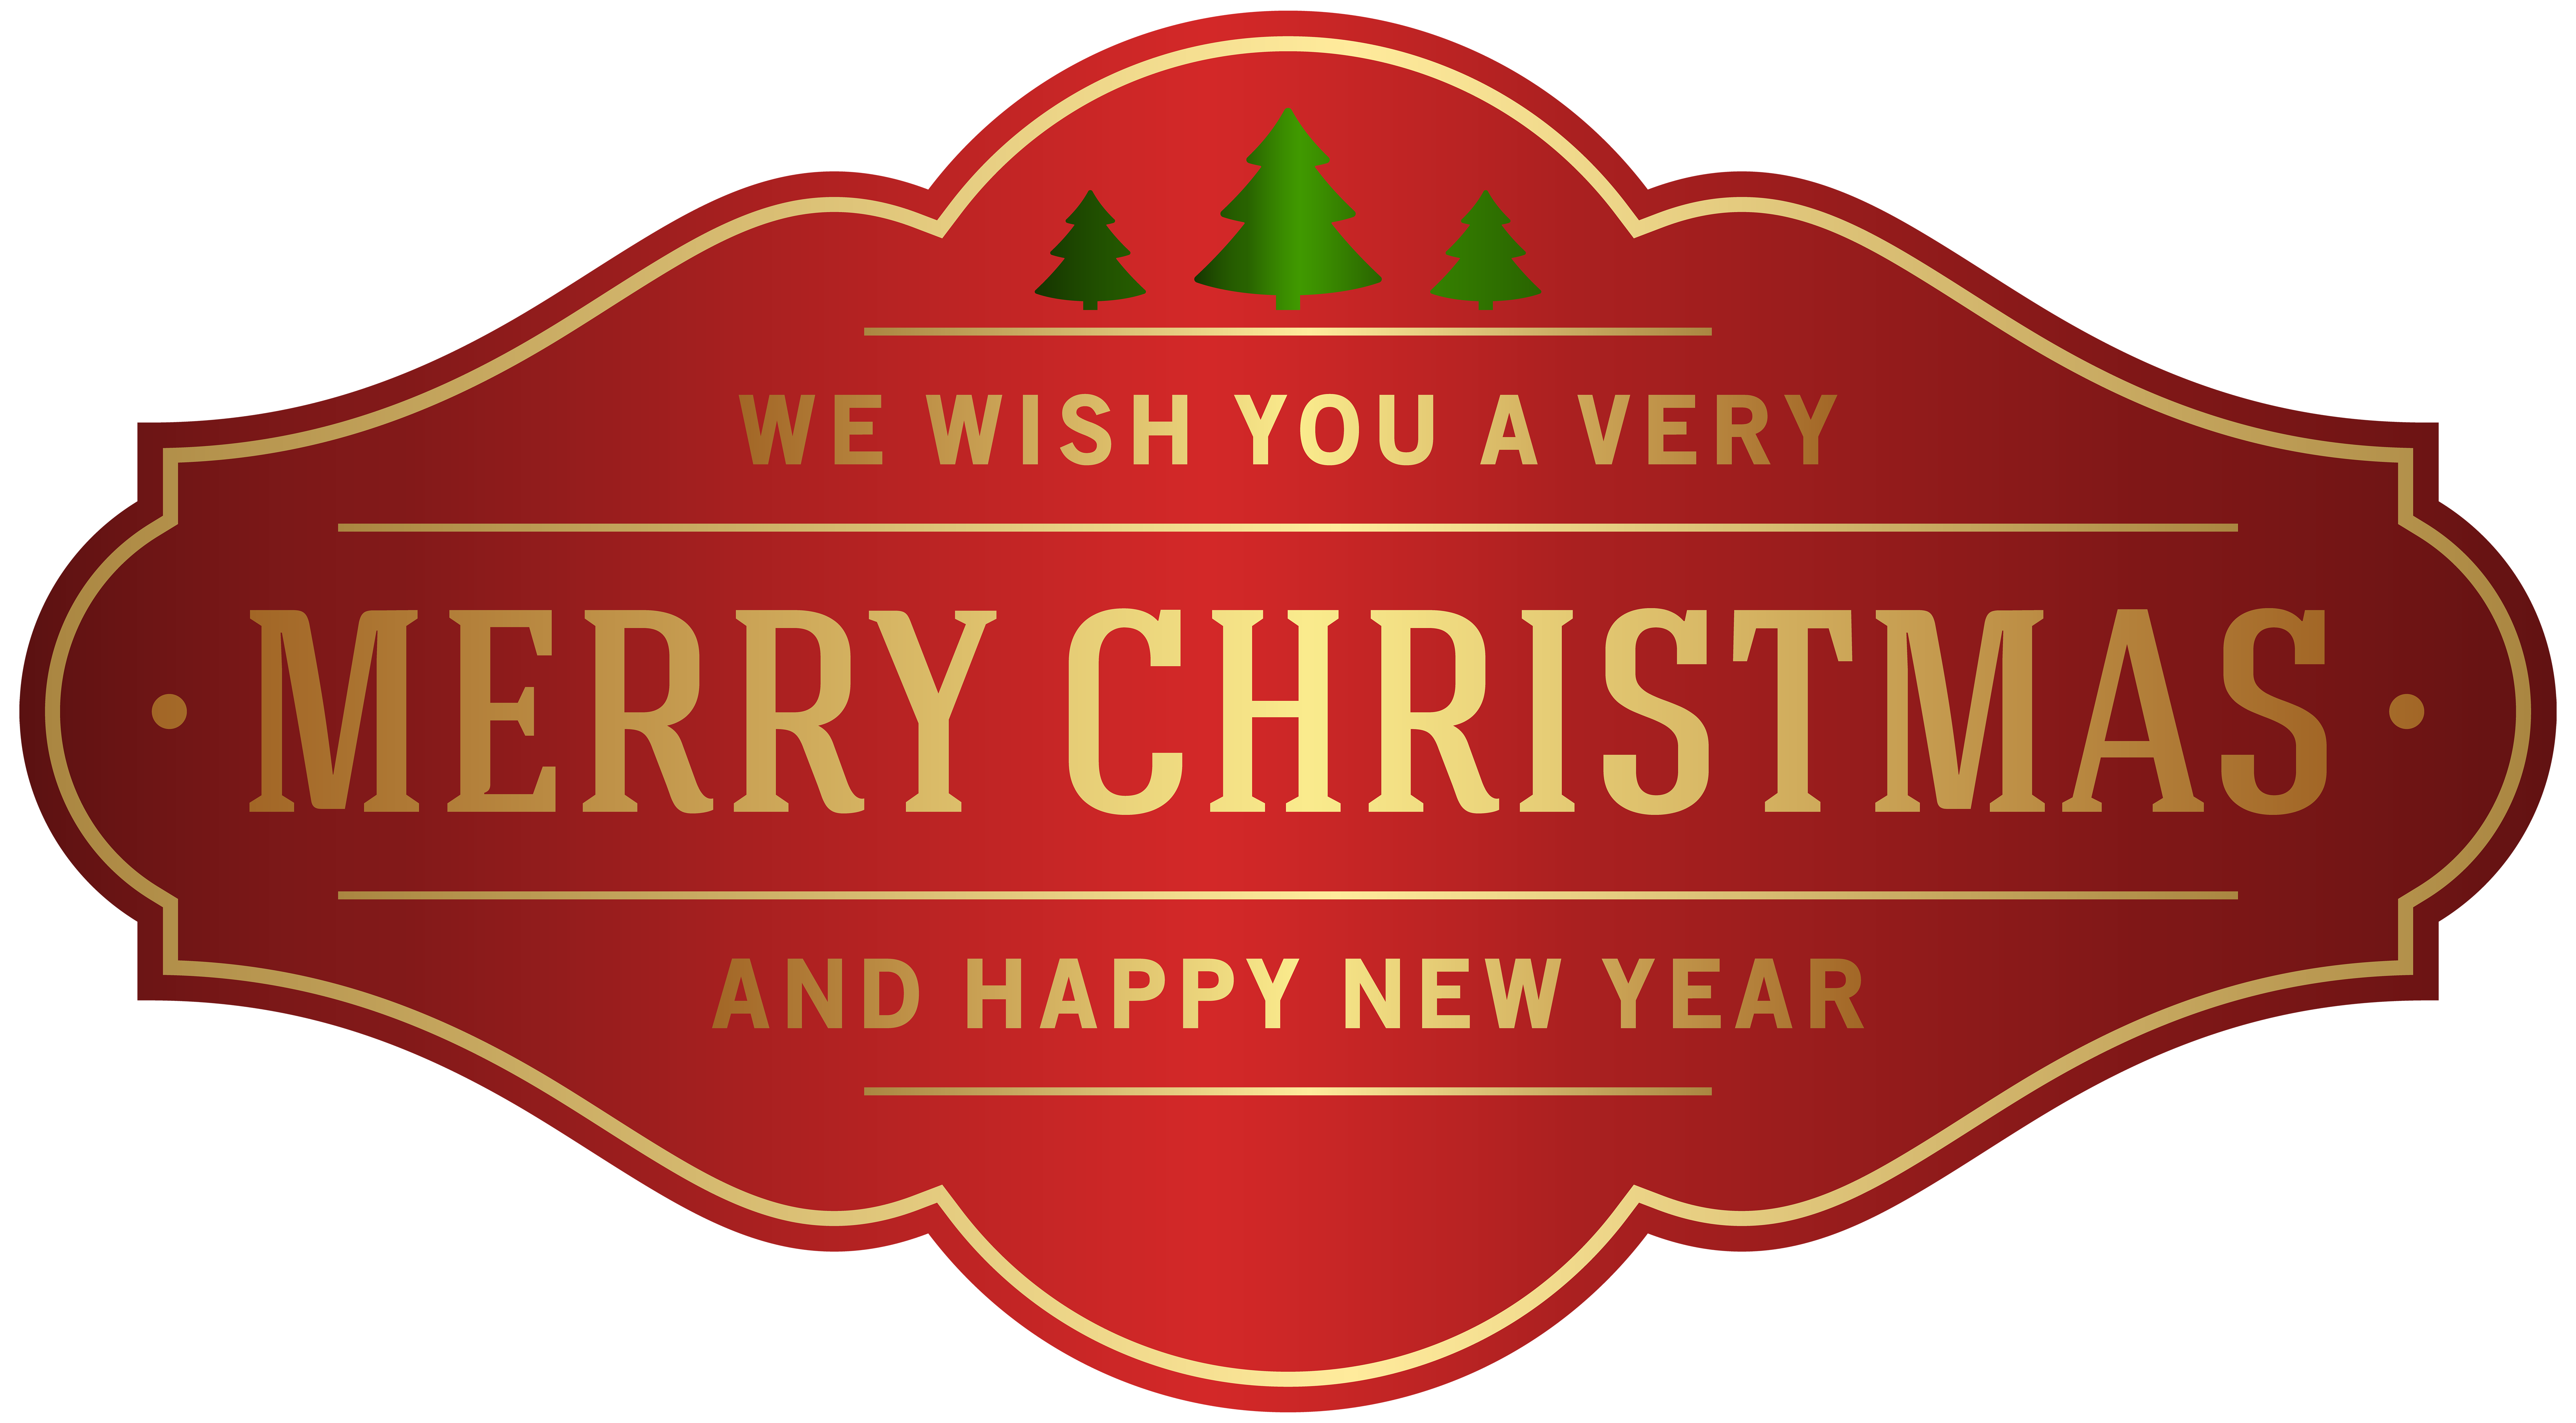 Merry Christmas Label PNG Clip Art Image Quality Image And Transparent PNG Free Clipart